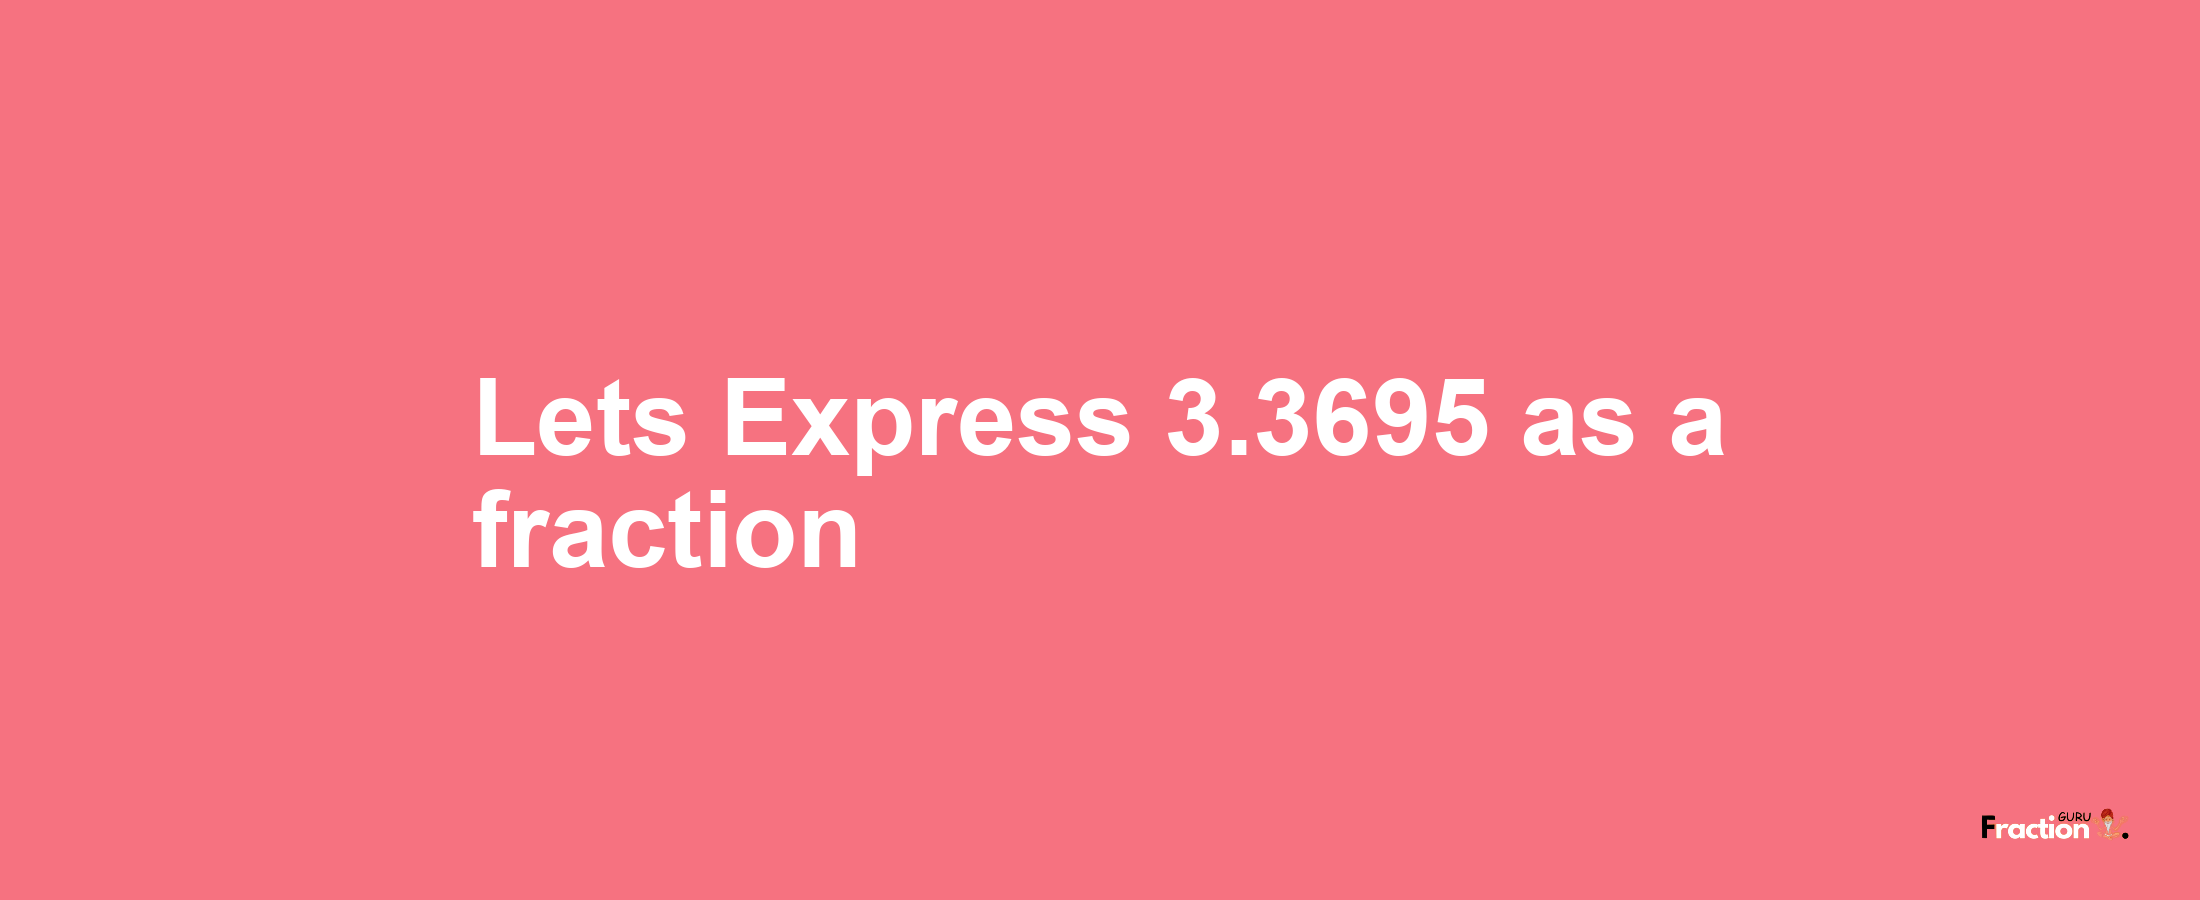 Lets Express 3.3695 as afraction